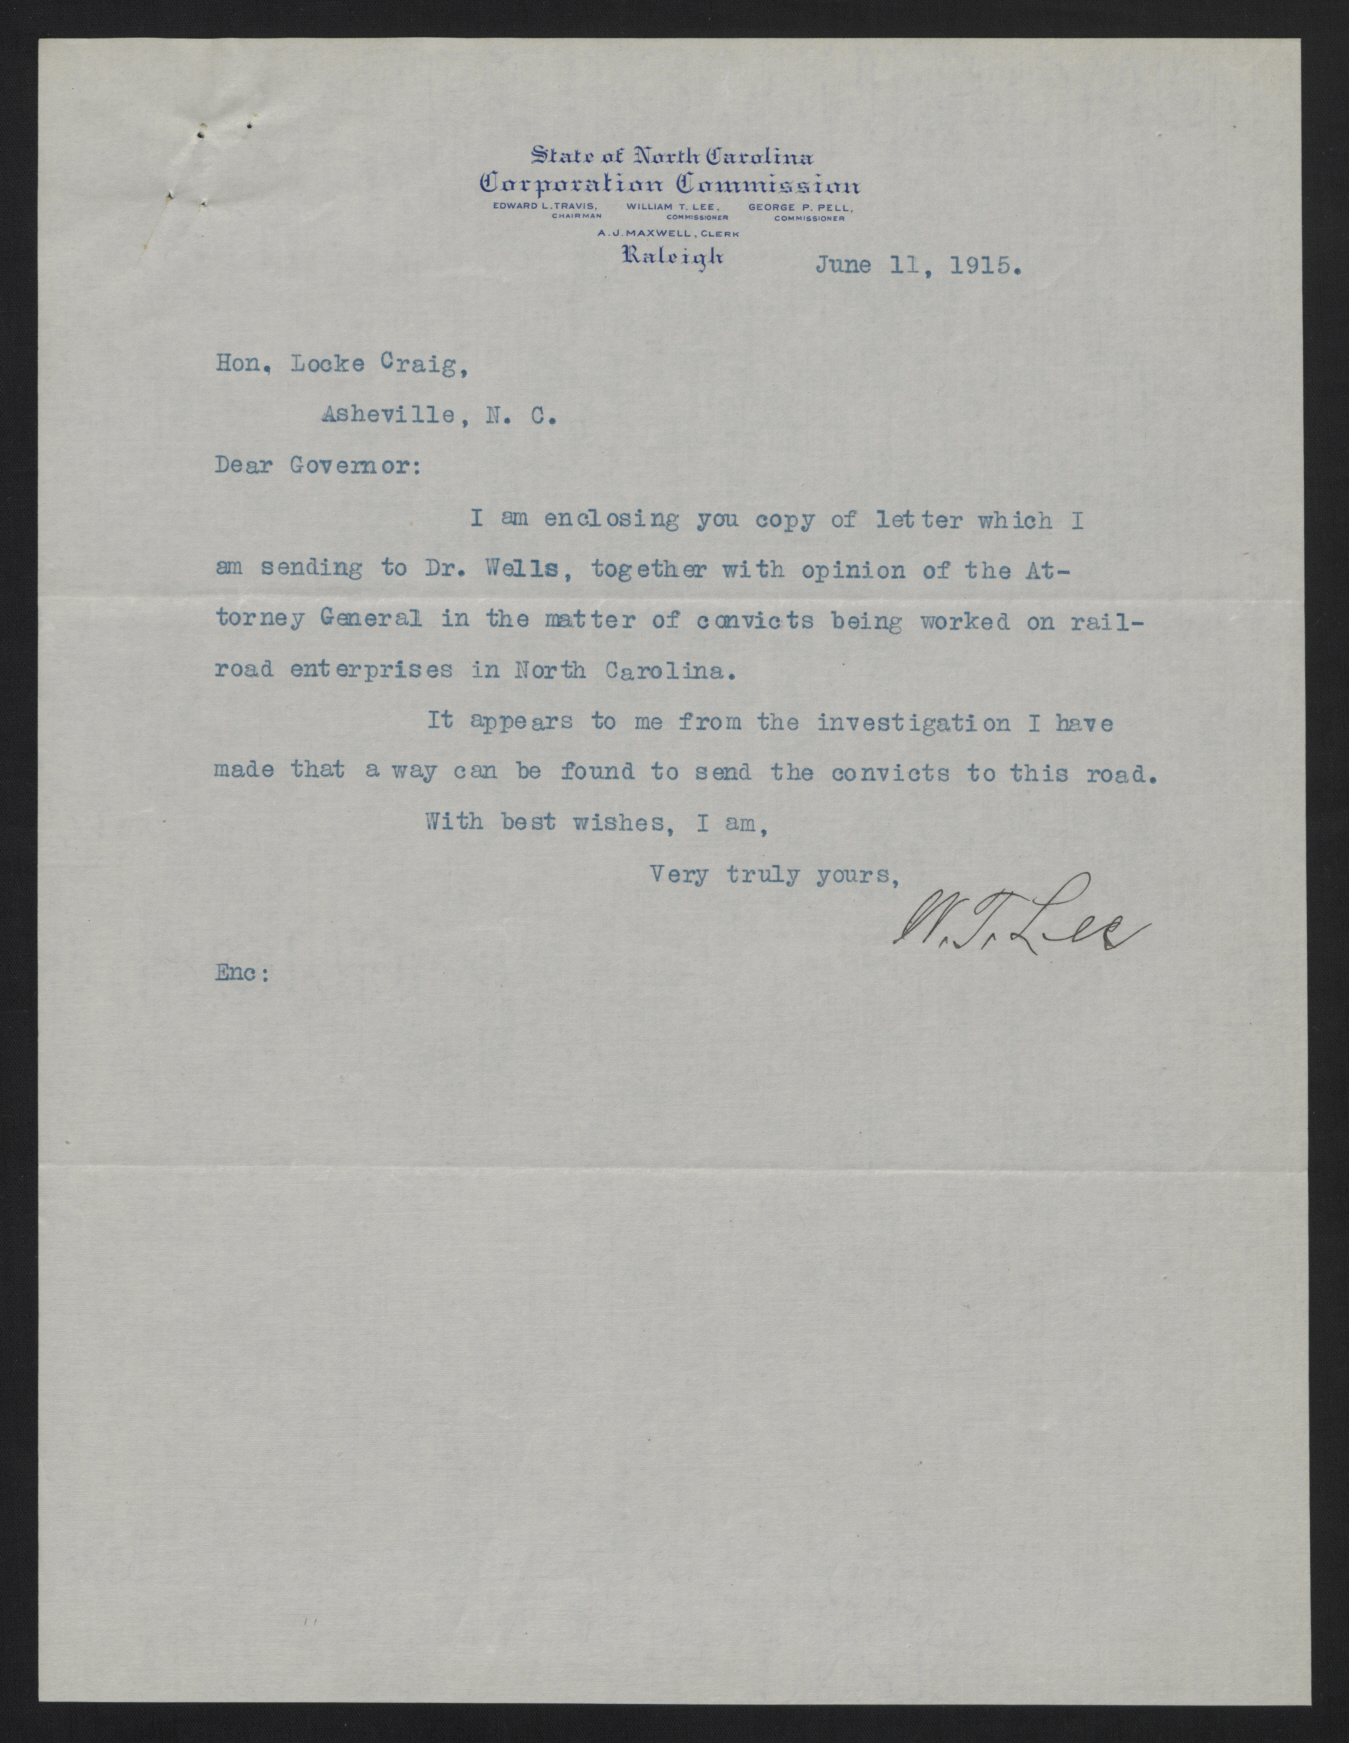 Letter from Lee to Craig, June 11, 1915